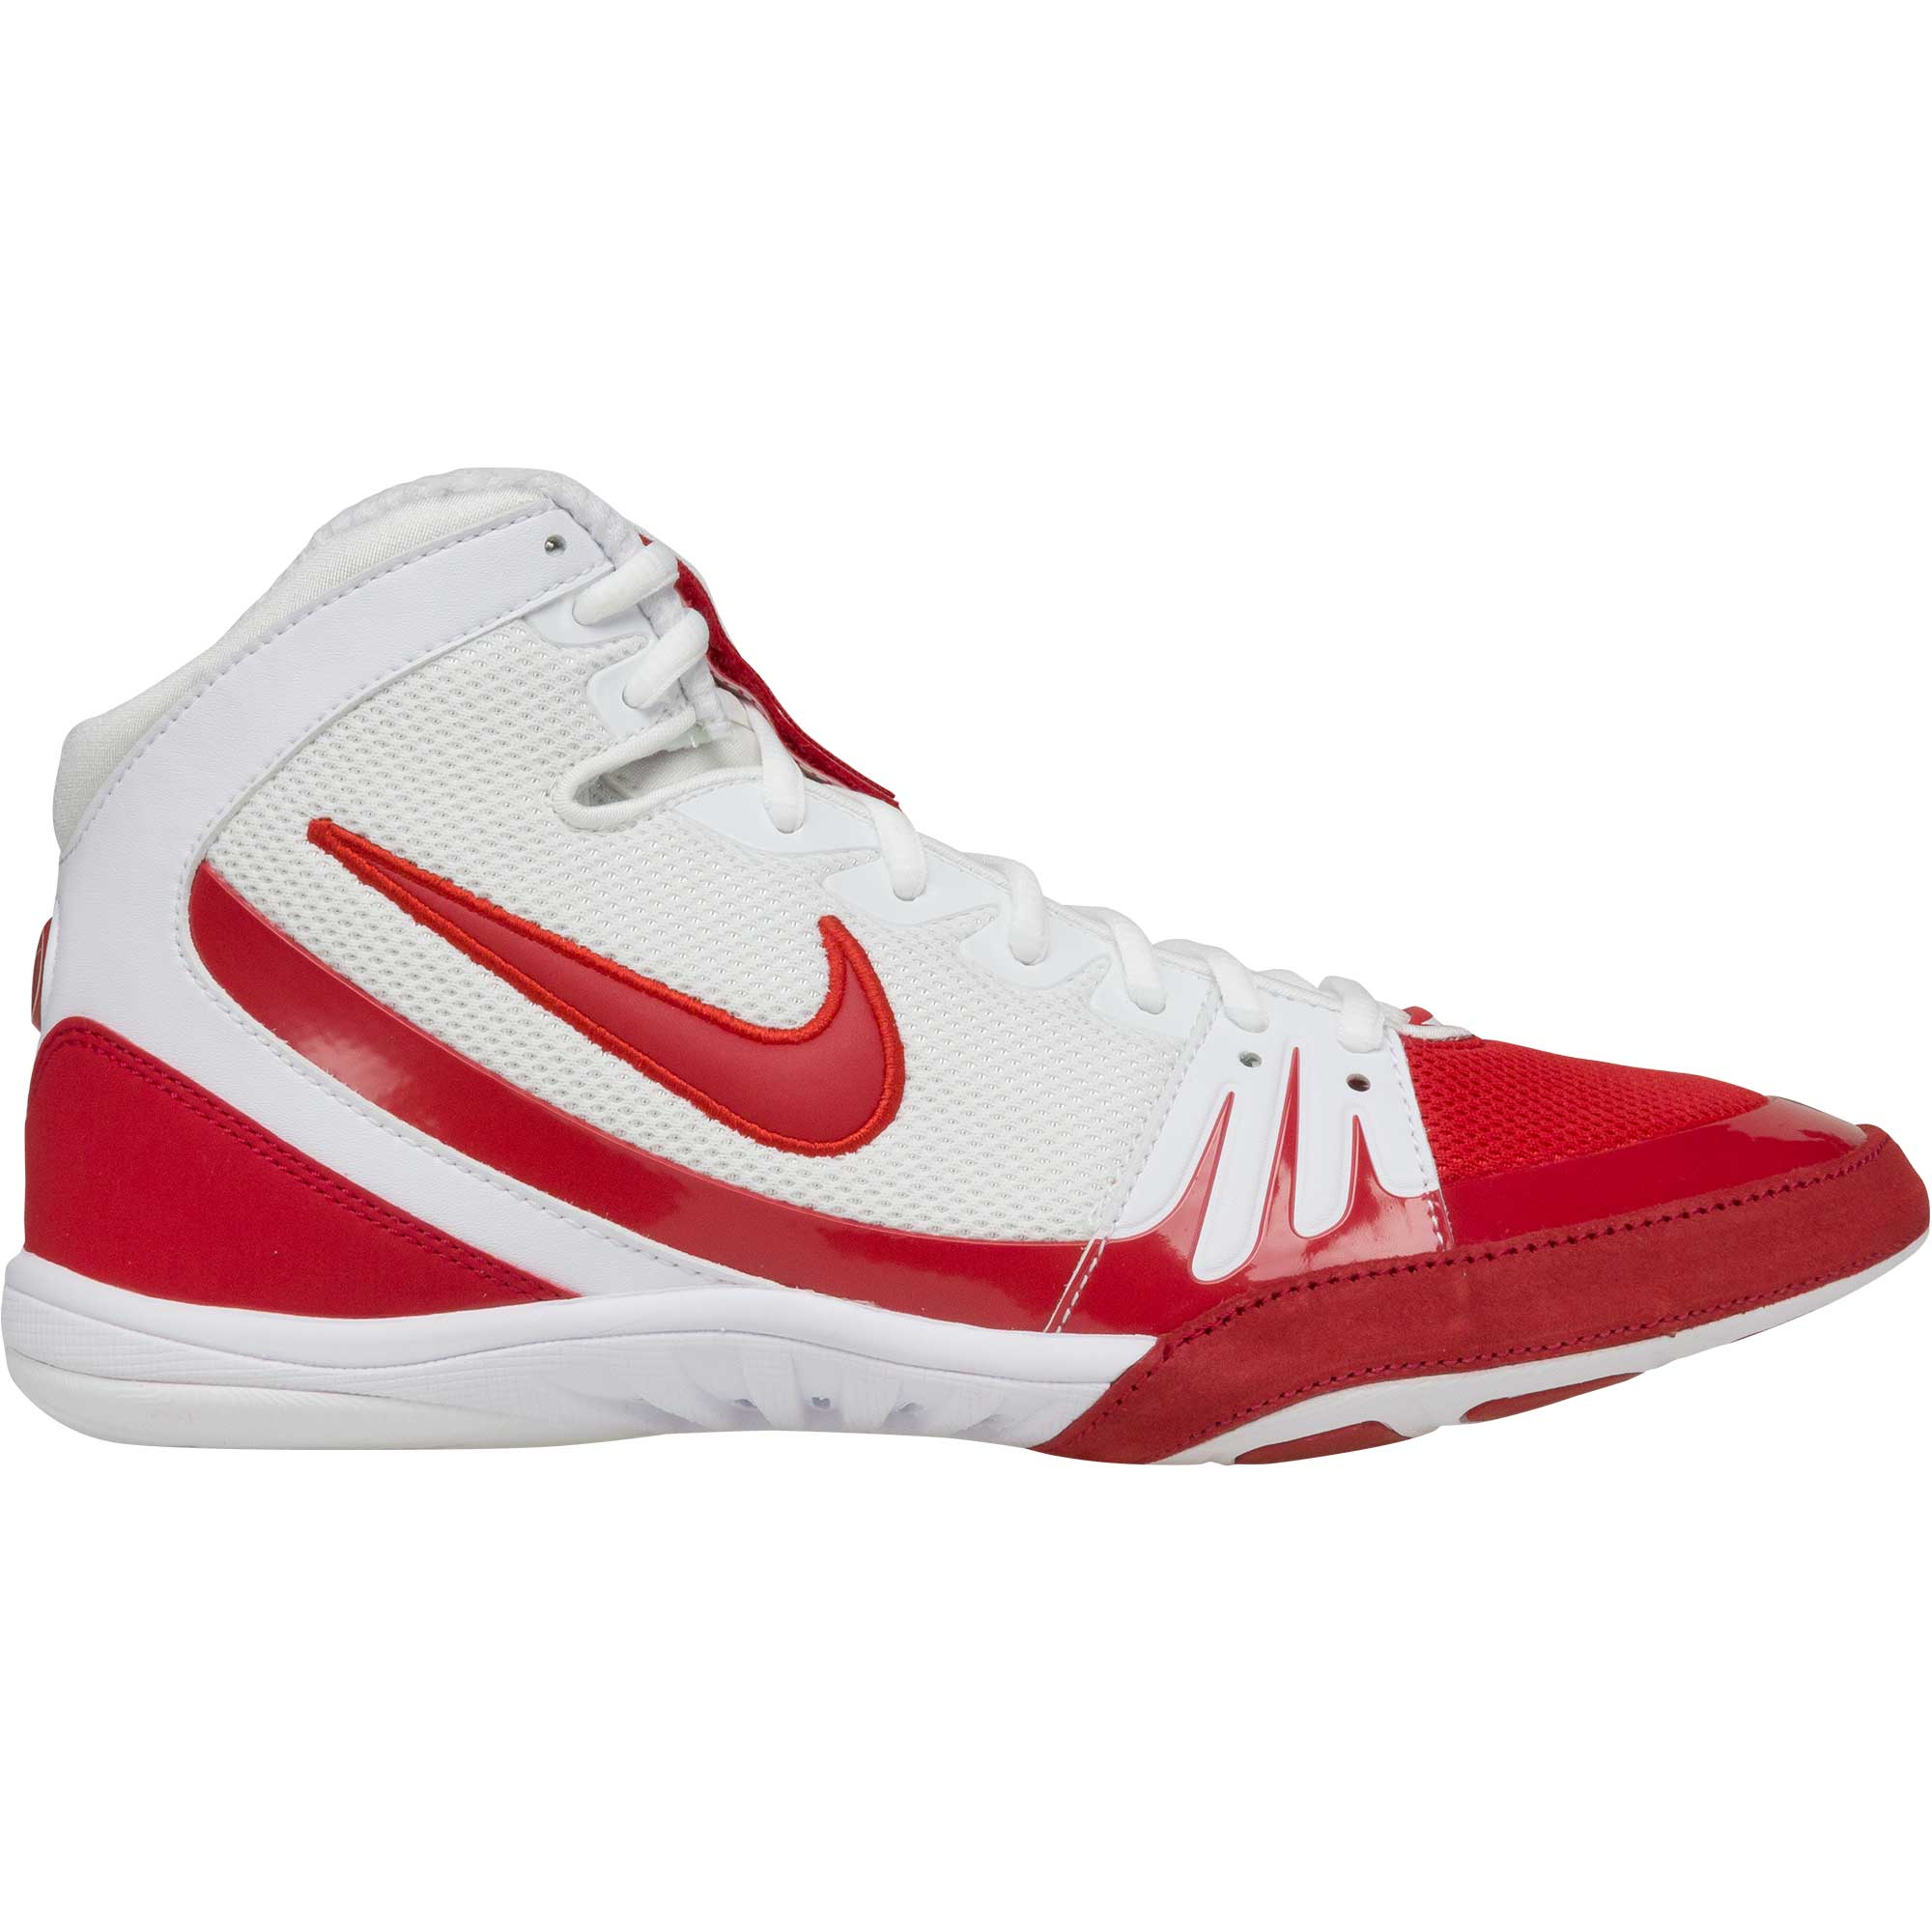 nike freeks red and black off 60% - www 